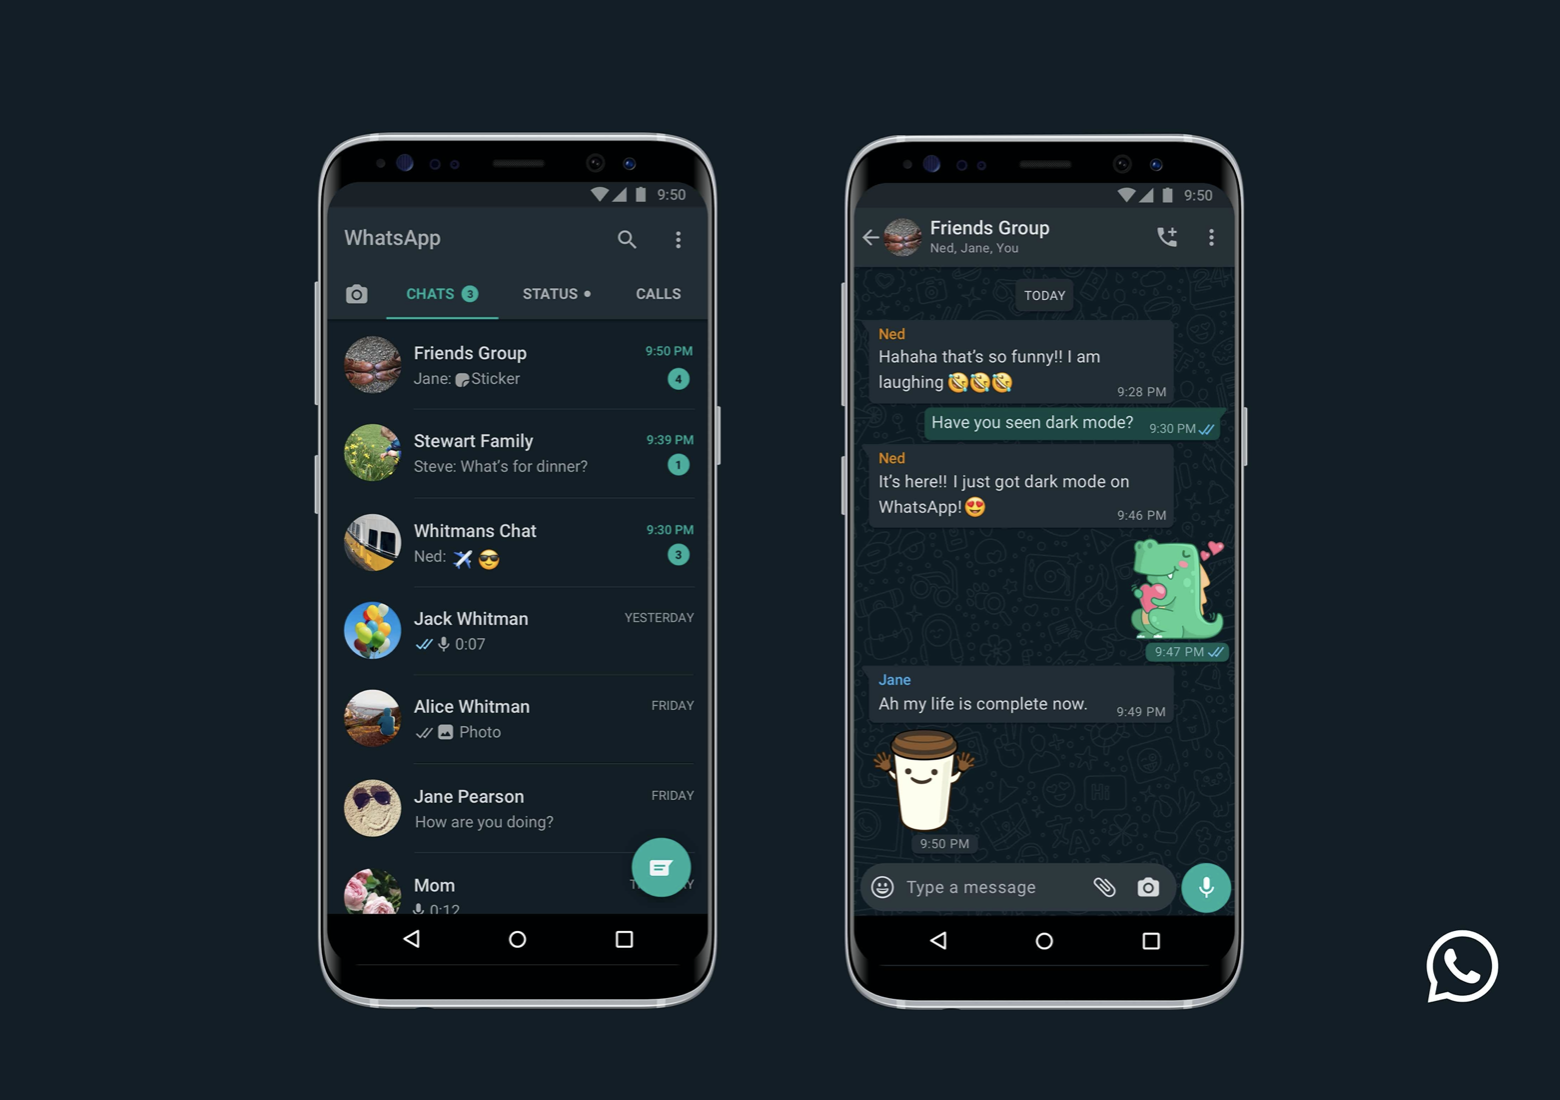 WhatsApp Dark Mode Is Now Available on iOS and Android